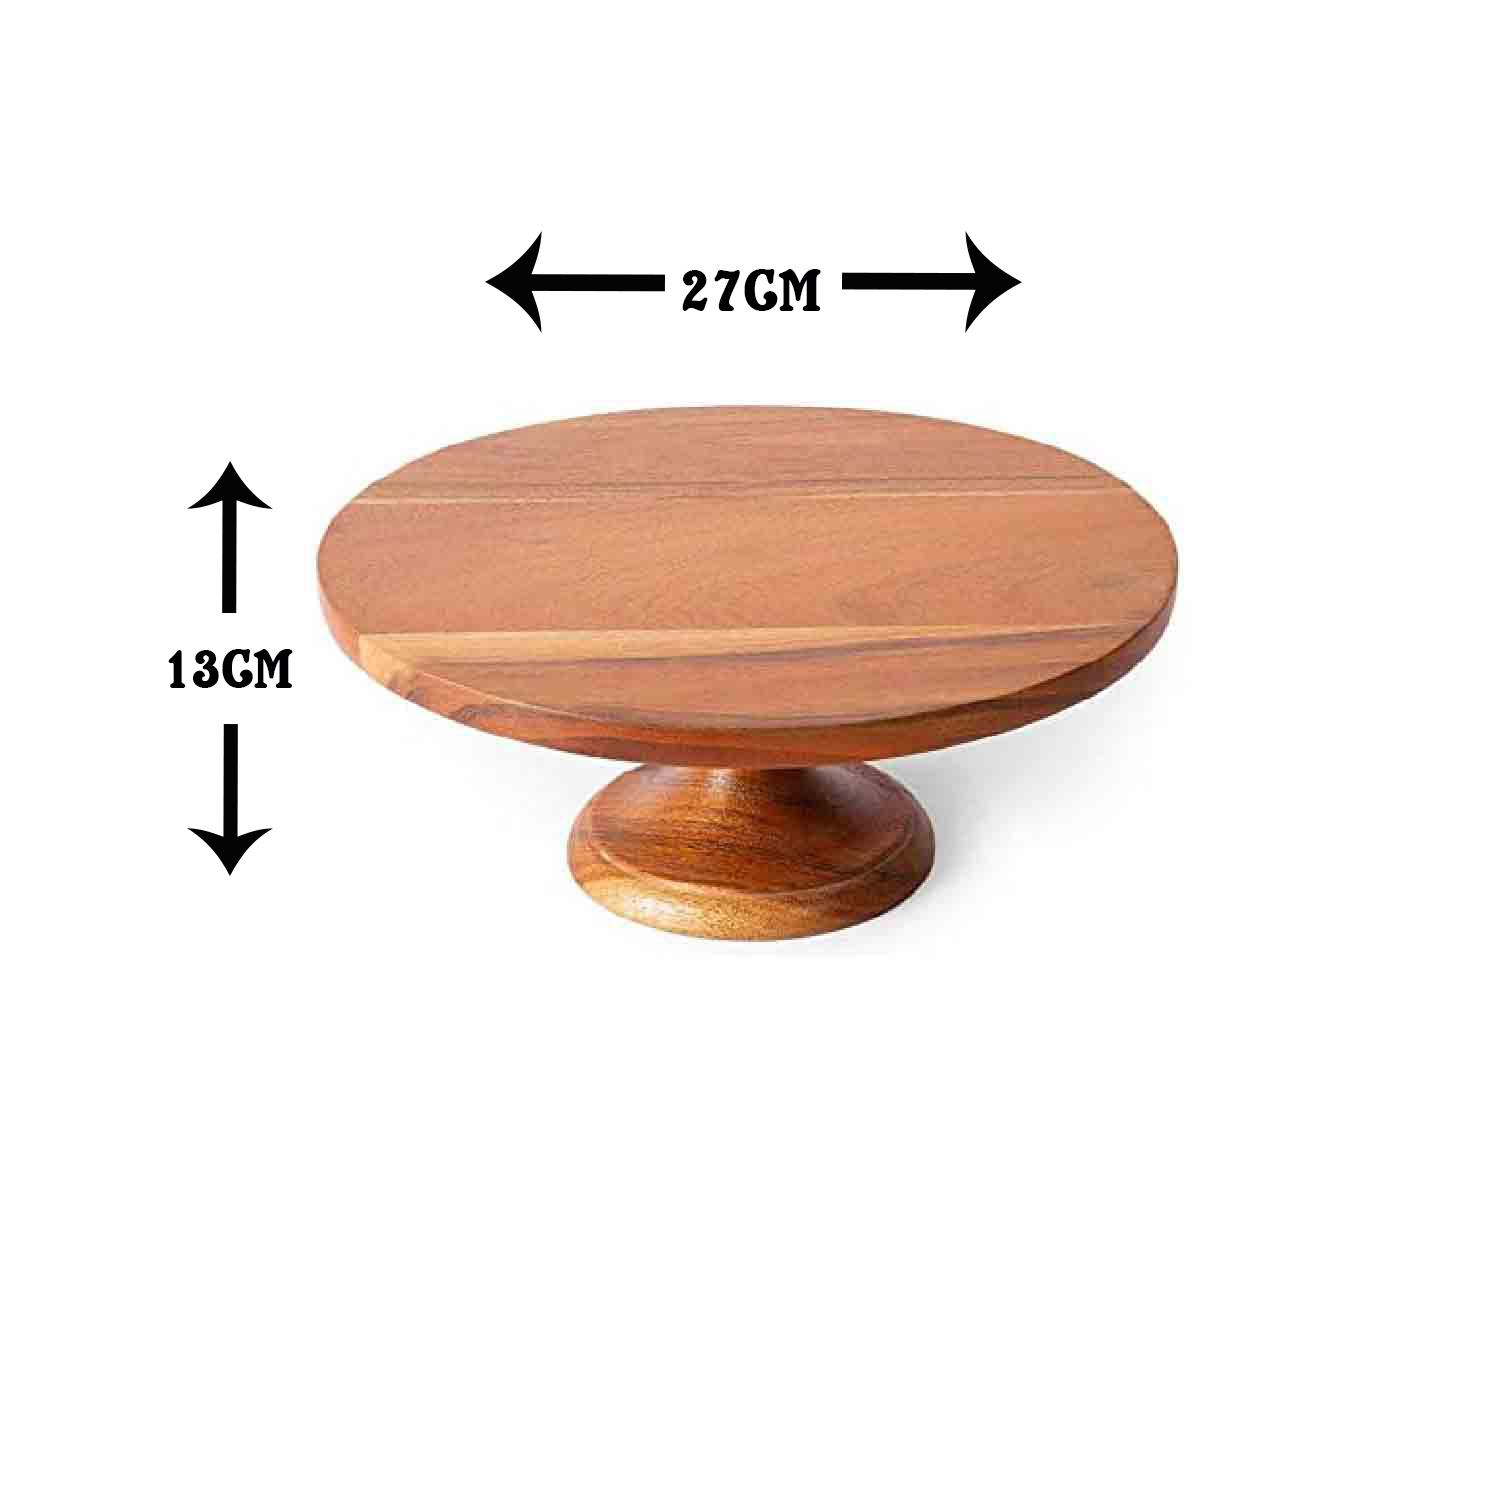 1PC 27CM DIAMETER X 13CM HEIGHT WOODEN TOP CAKE STAND